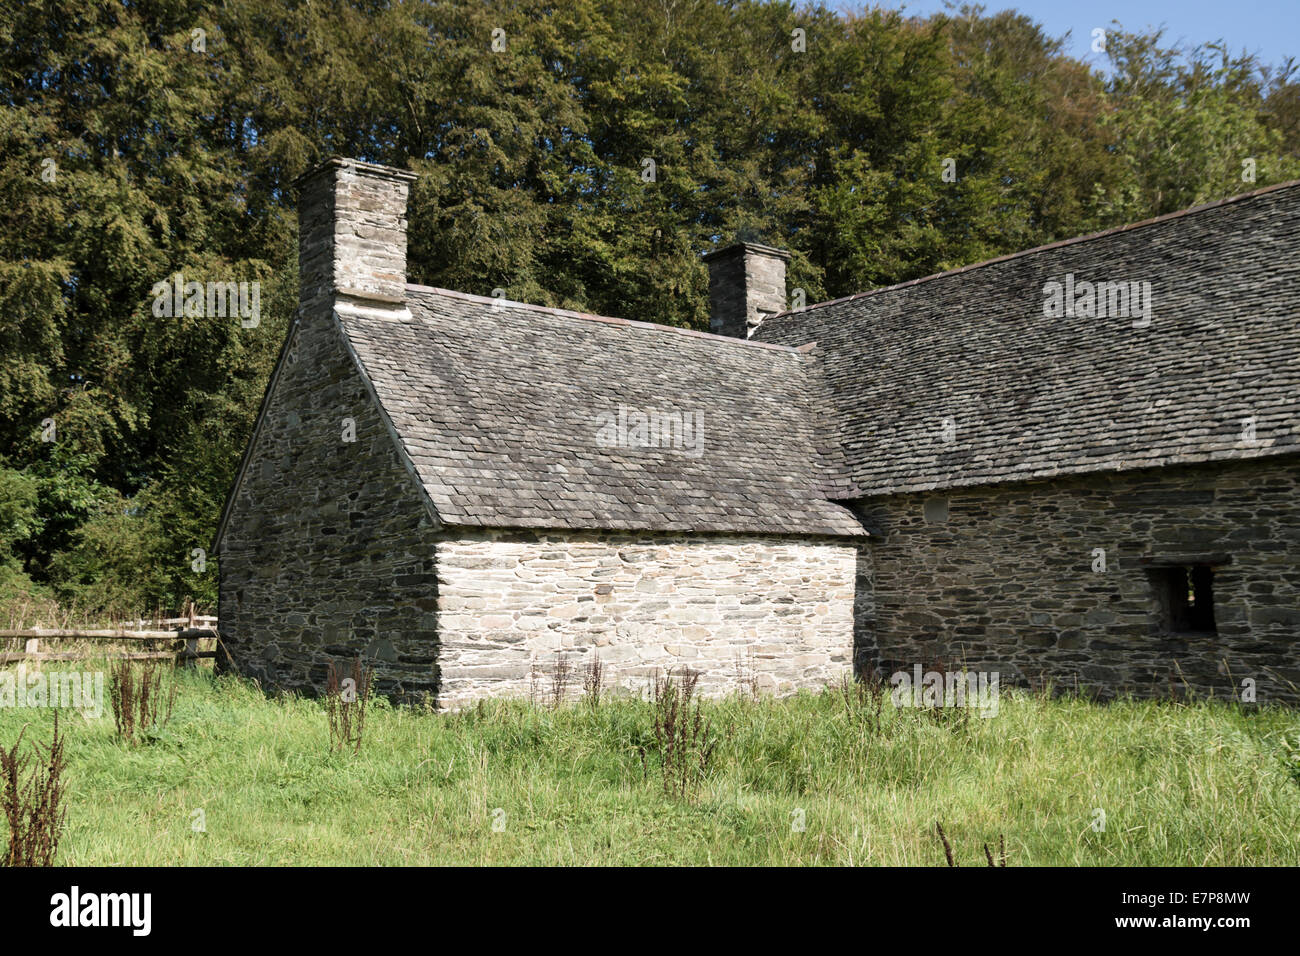 St Fagans nationales Geschichte Museum Wales UK Stone cottage Stockfoto